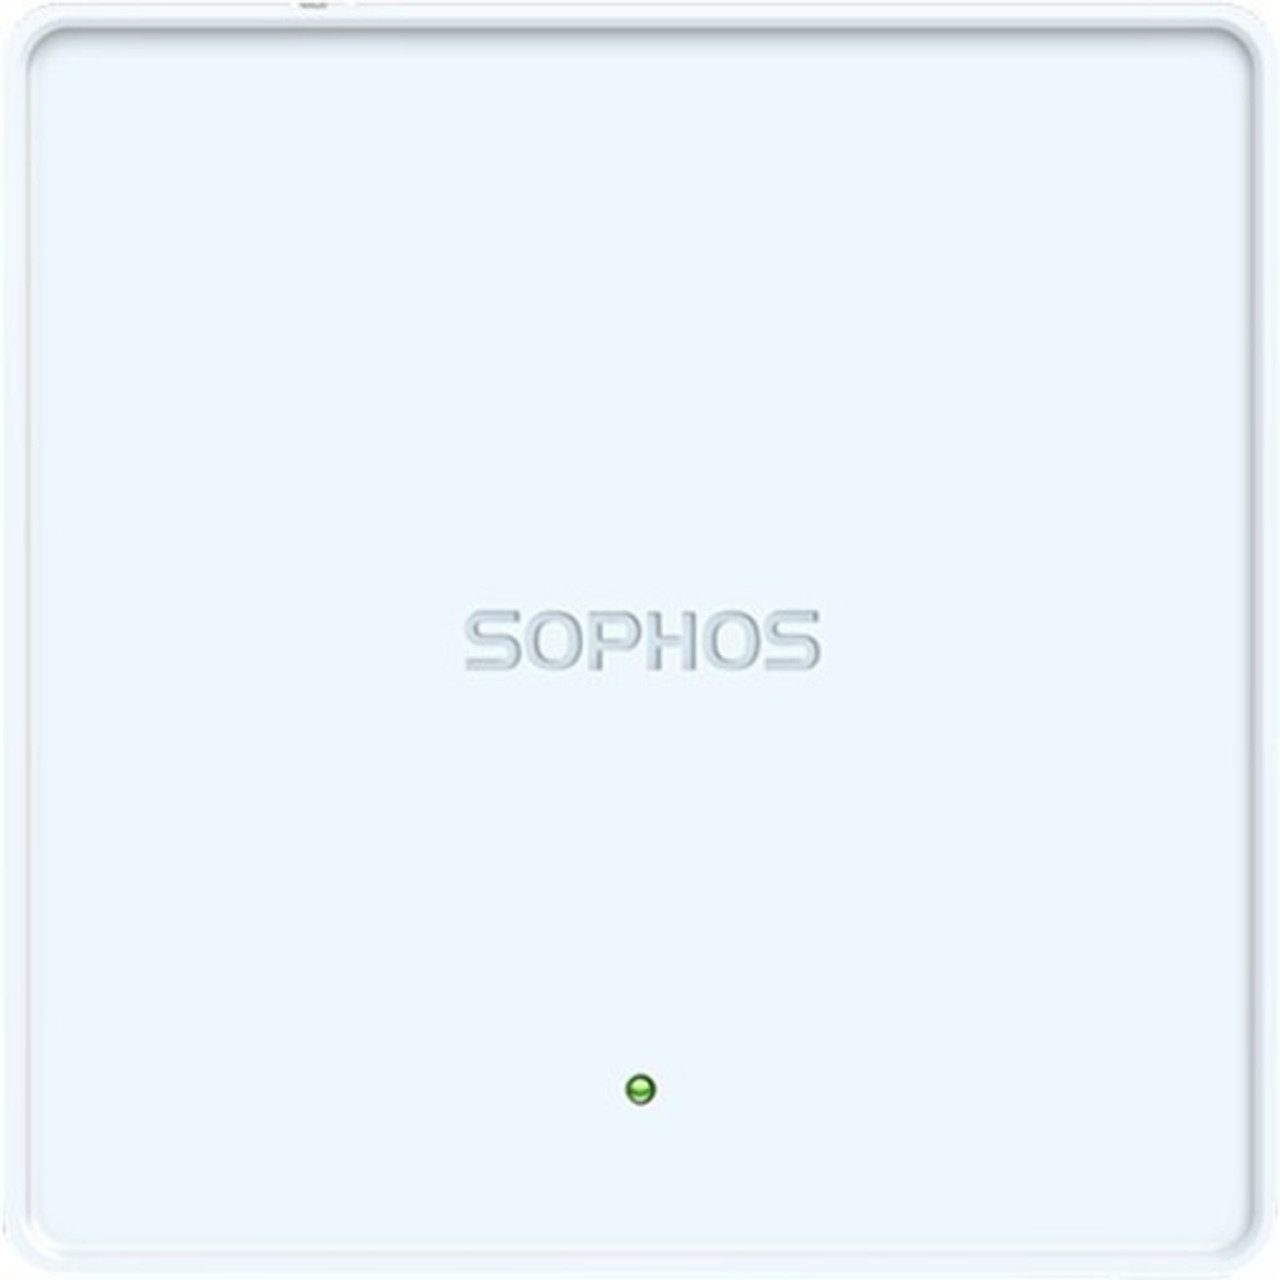 Sophos APX 320 IEEE 802.11ac Wireless Access Point - 2.40 GHz, 5 GHz - MIMO Technology - 1 x Network (RJ-45) - Wall Mountable, Ceiling Mountable, Desktop PLAIN NO POWER ADAP/POE INJECTOR